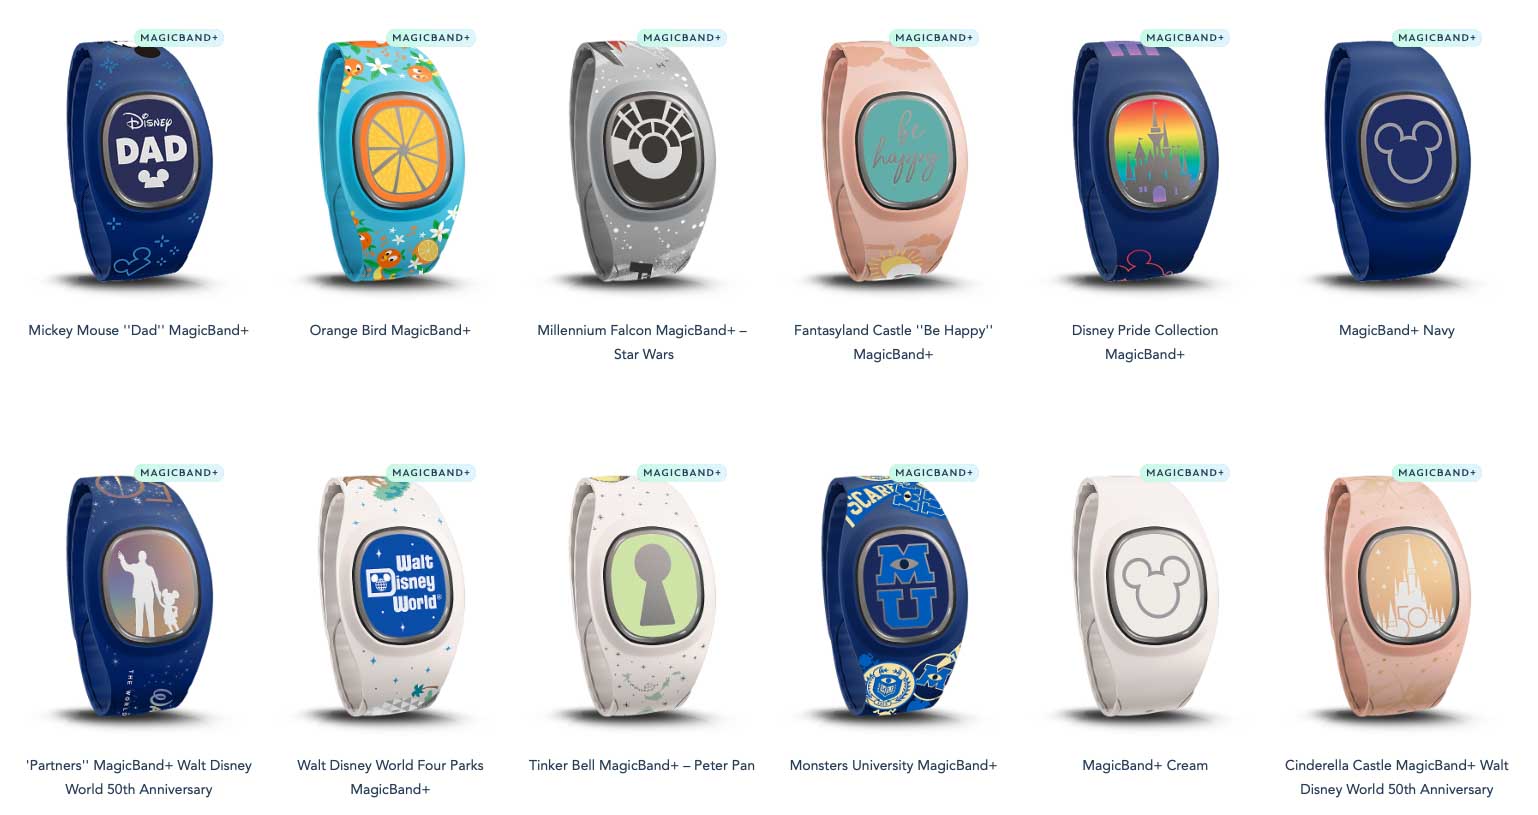  Disney Parks MagicBand 2.0 - Link It Later Magic